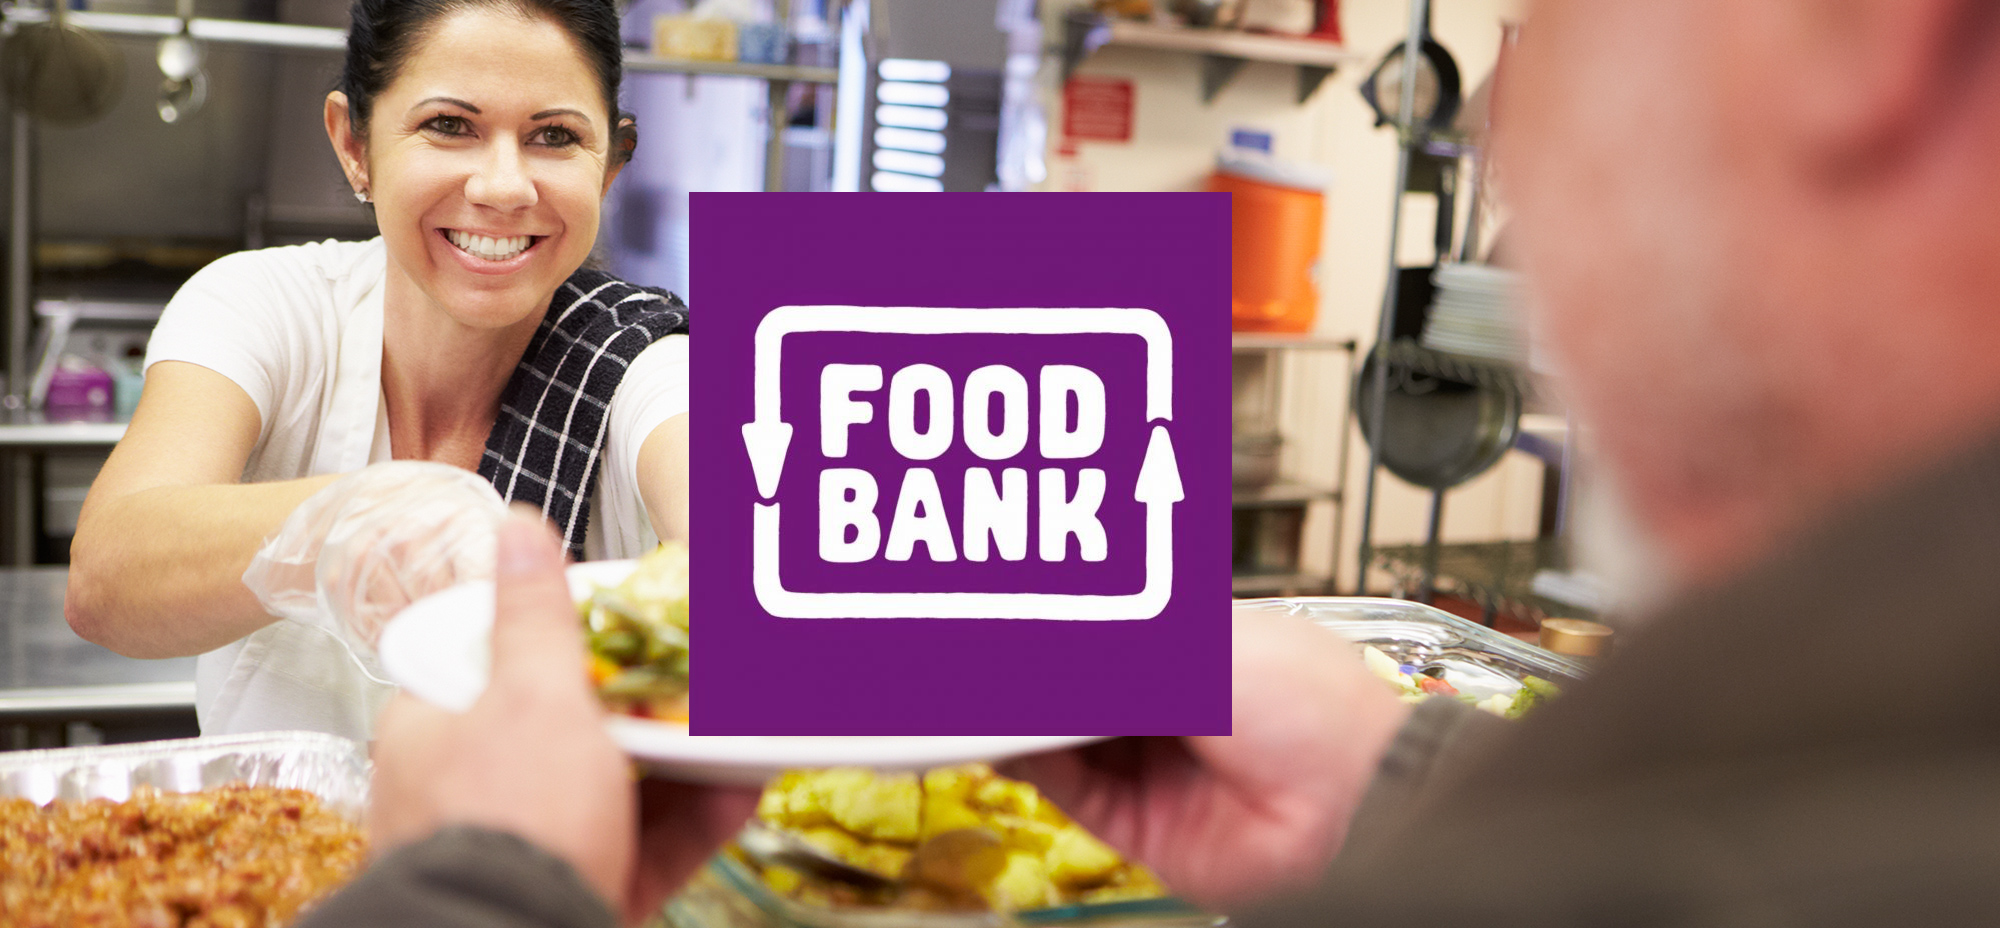 Photo is of the Food Bank organisation logo